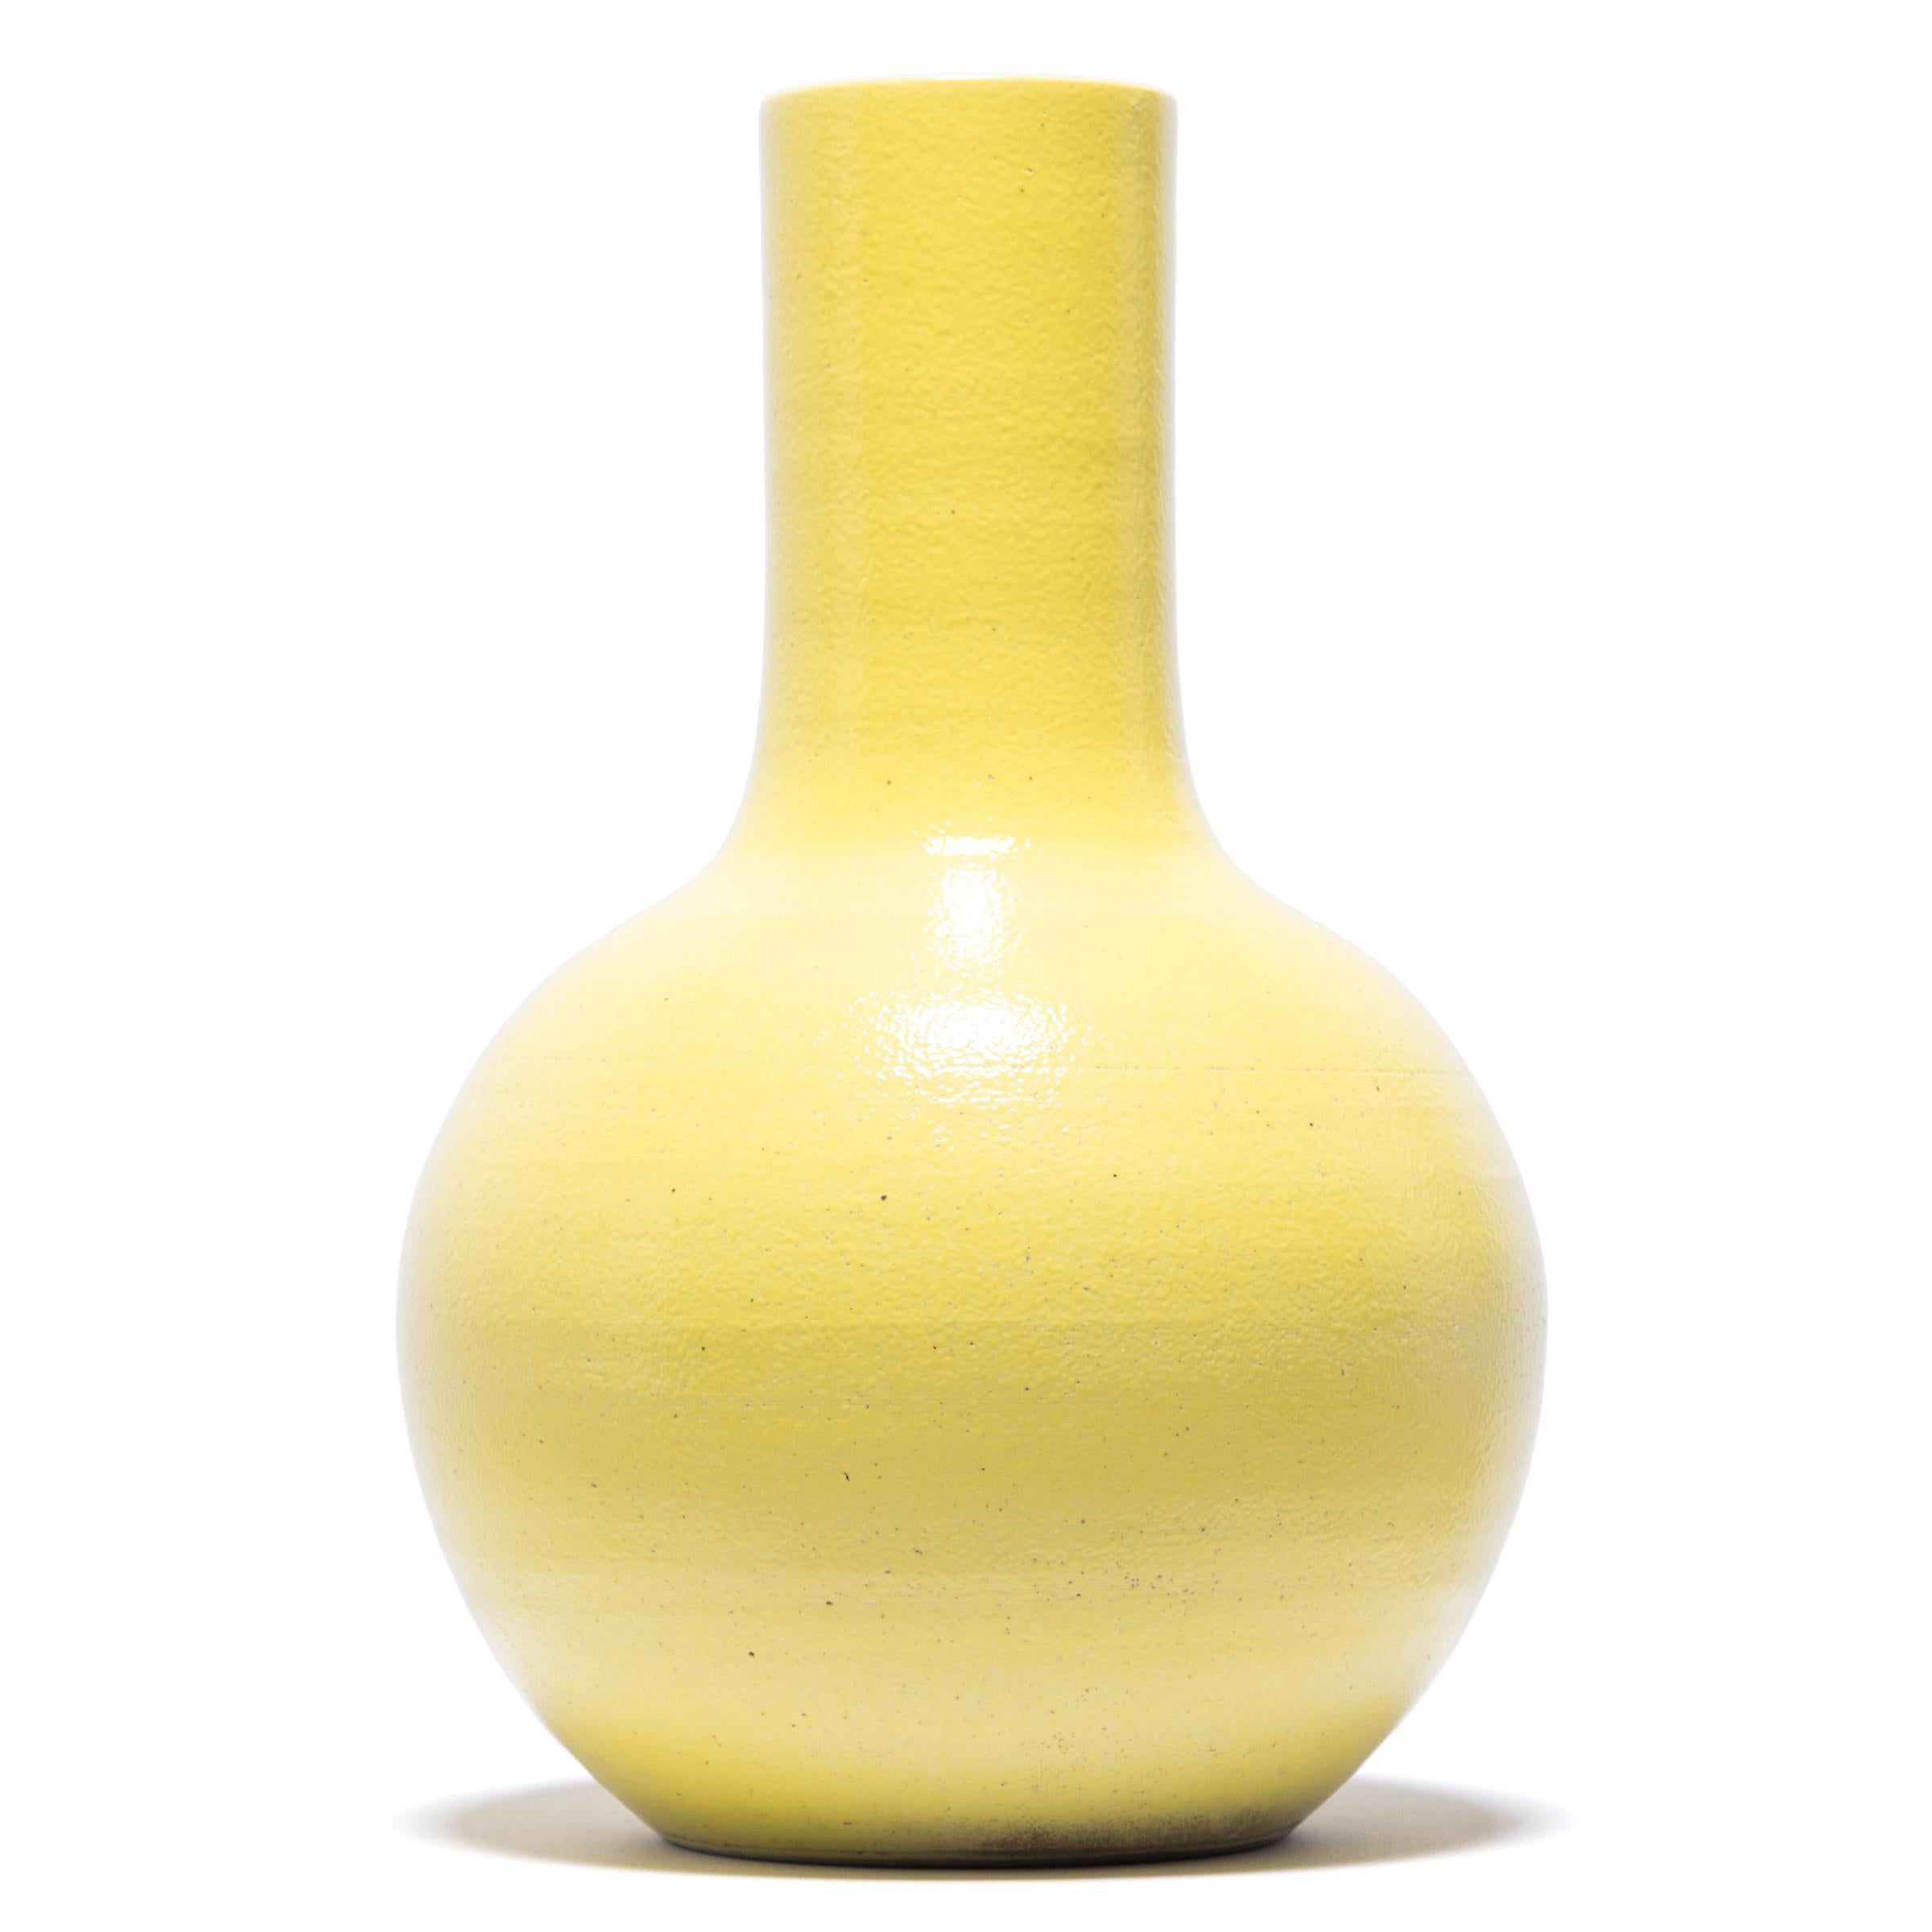 Drawing on a long Chinese tradition of monochrome ceramics, this tall gooseneck vase is glazed in cheerful citron-yellow glaze. The vase features a rounded, globular body and a narrow cylindrical neck, a classic form known as 'tianqiuping' or